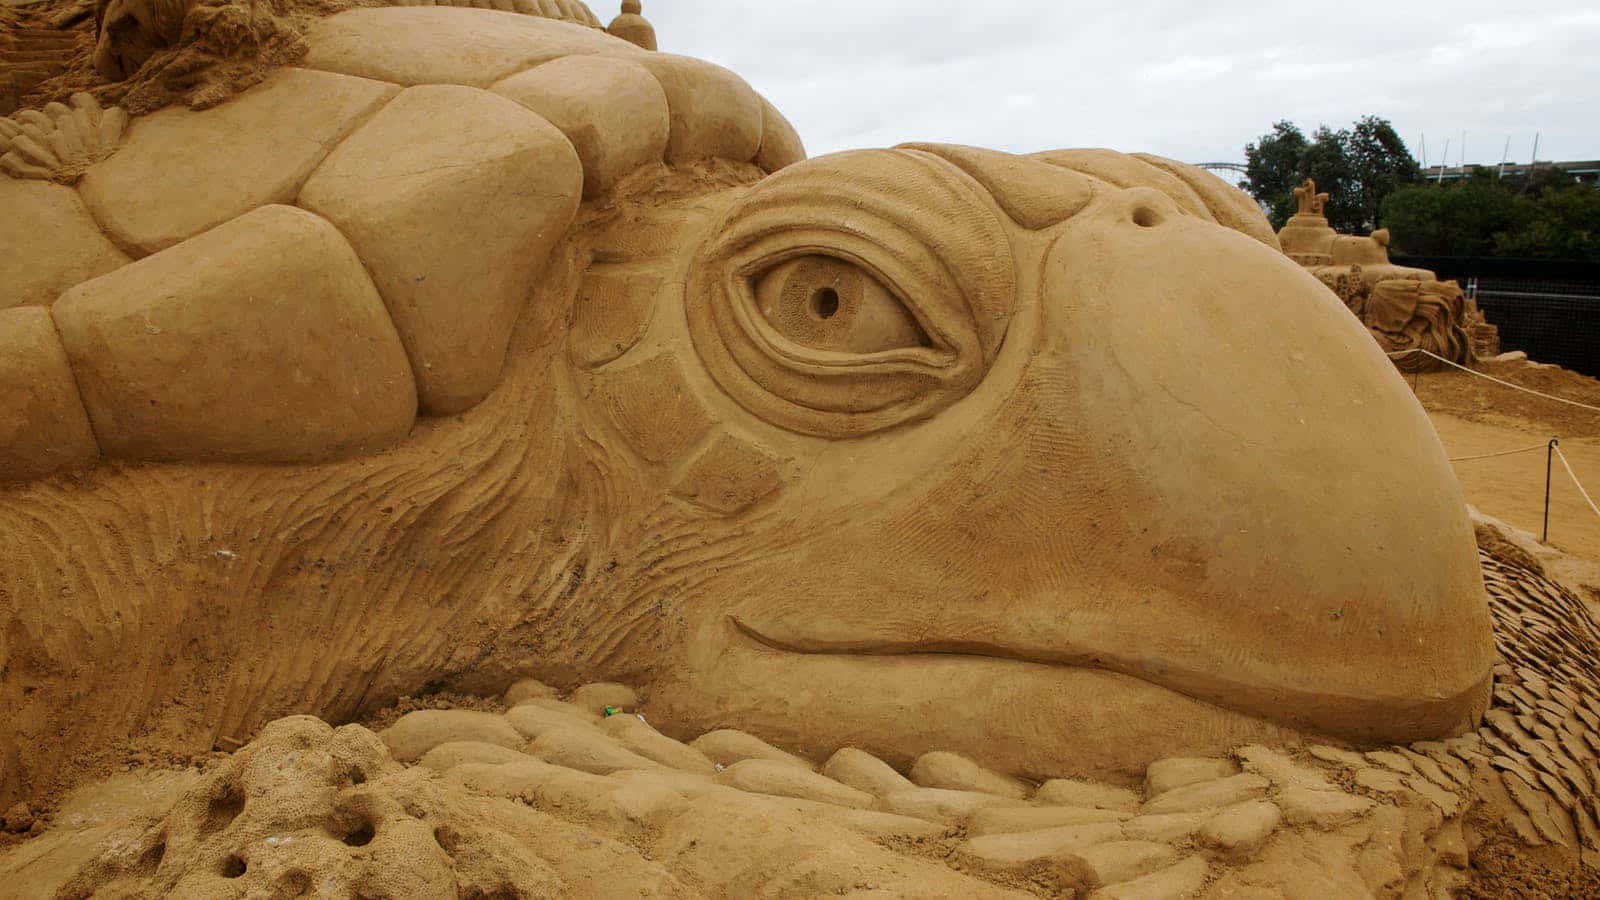 A Sand Sculpture Of A Turtle